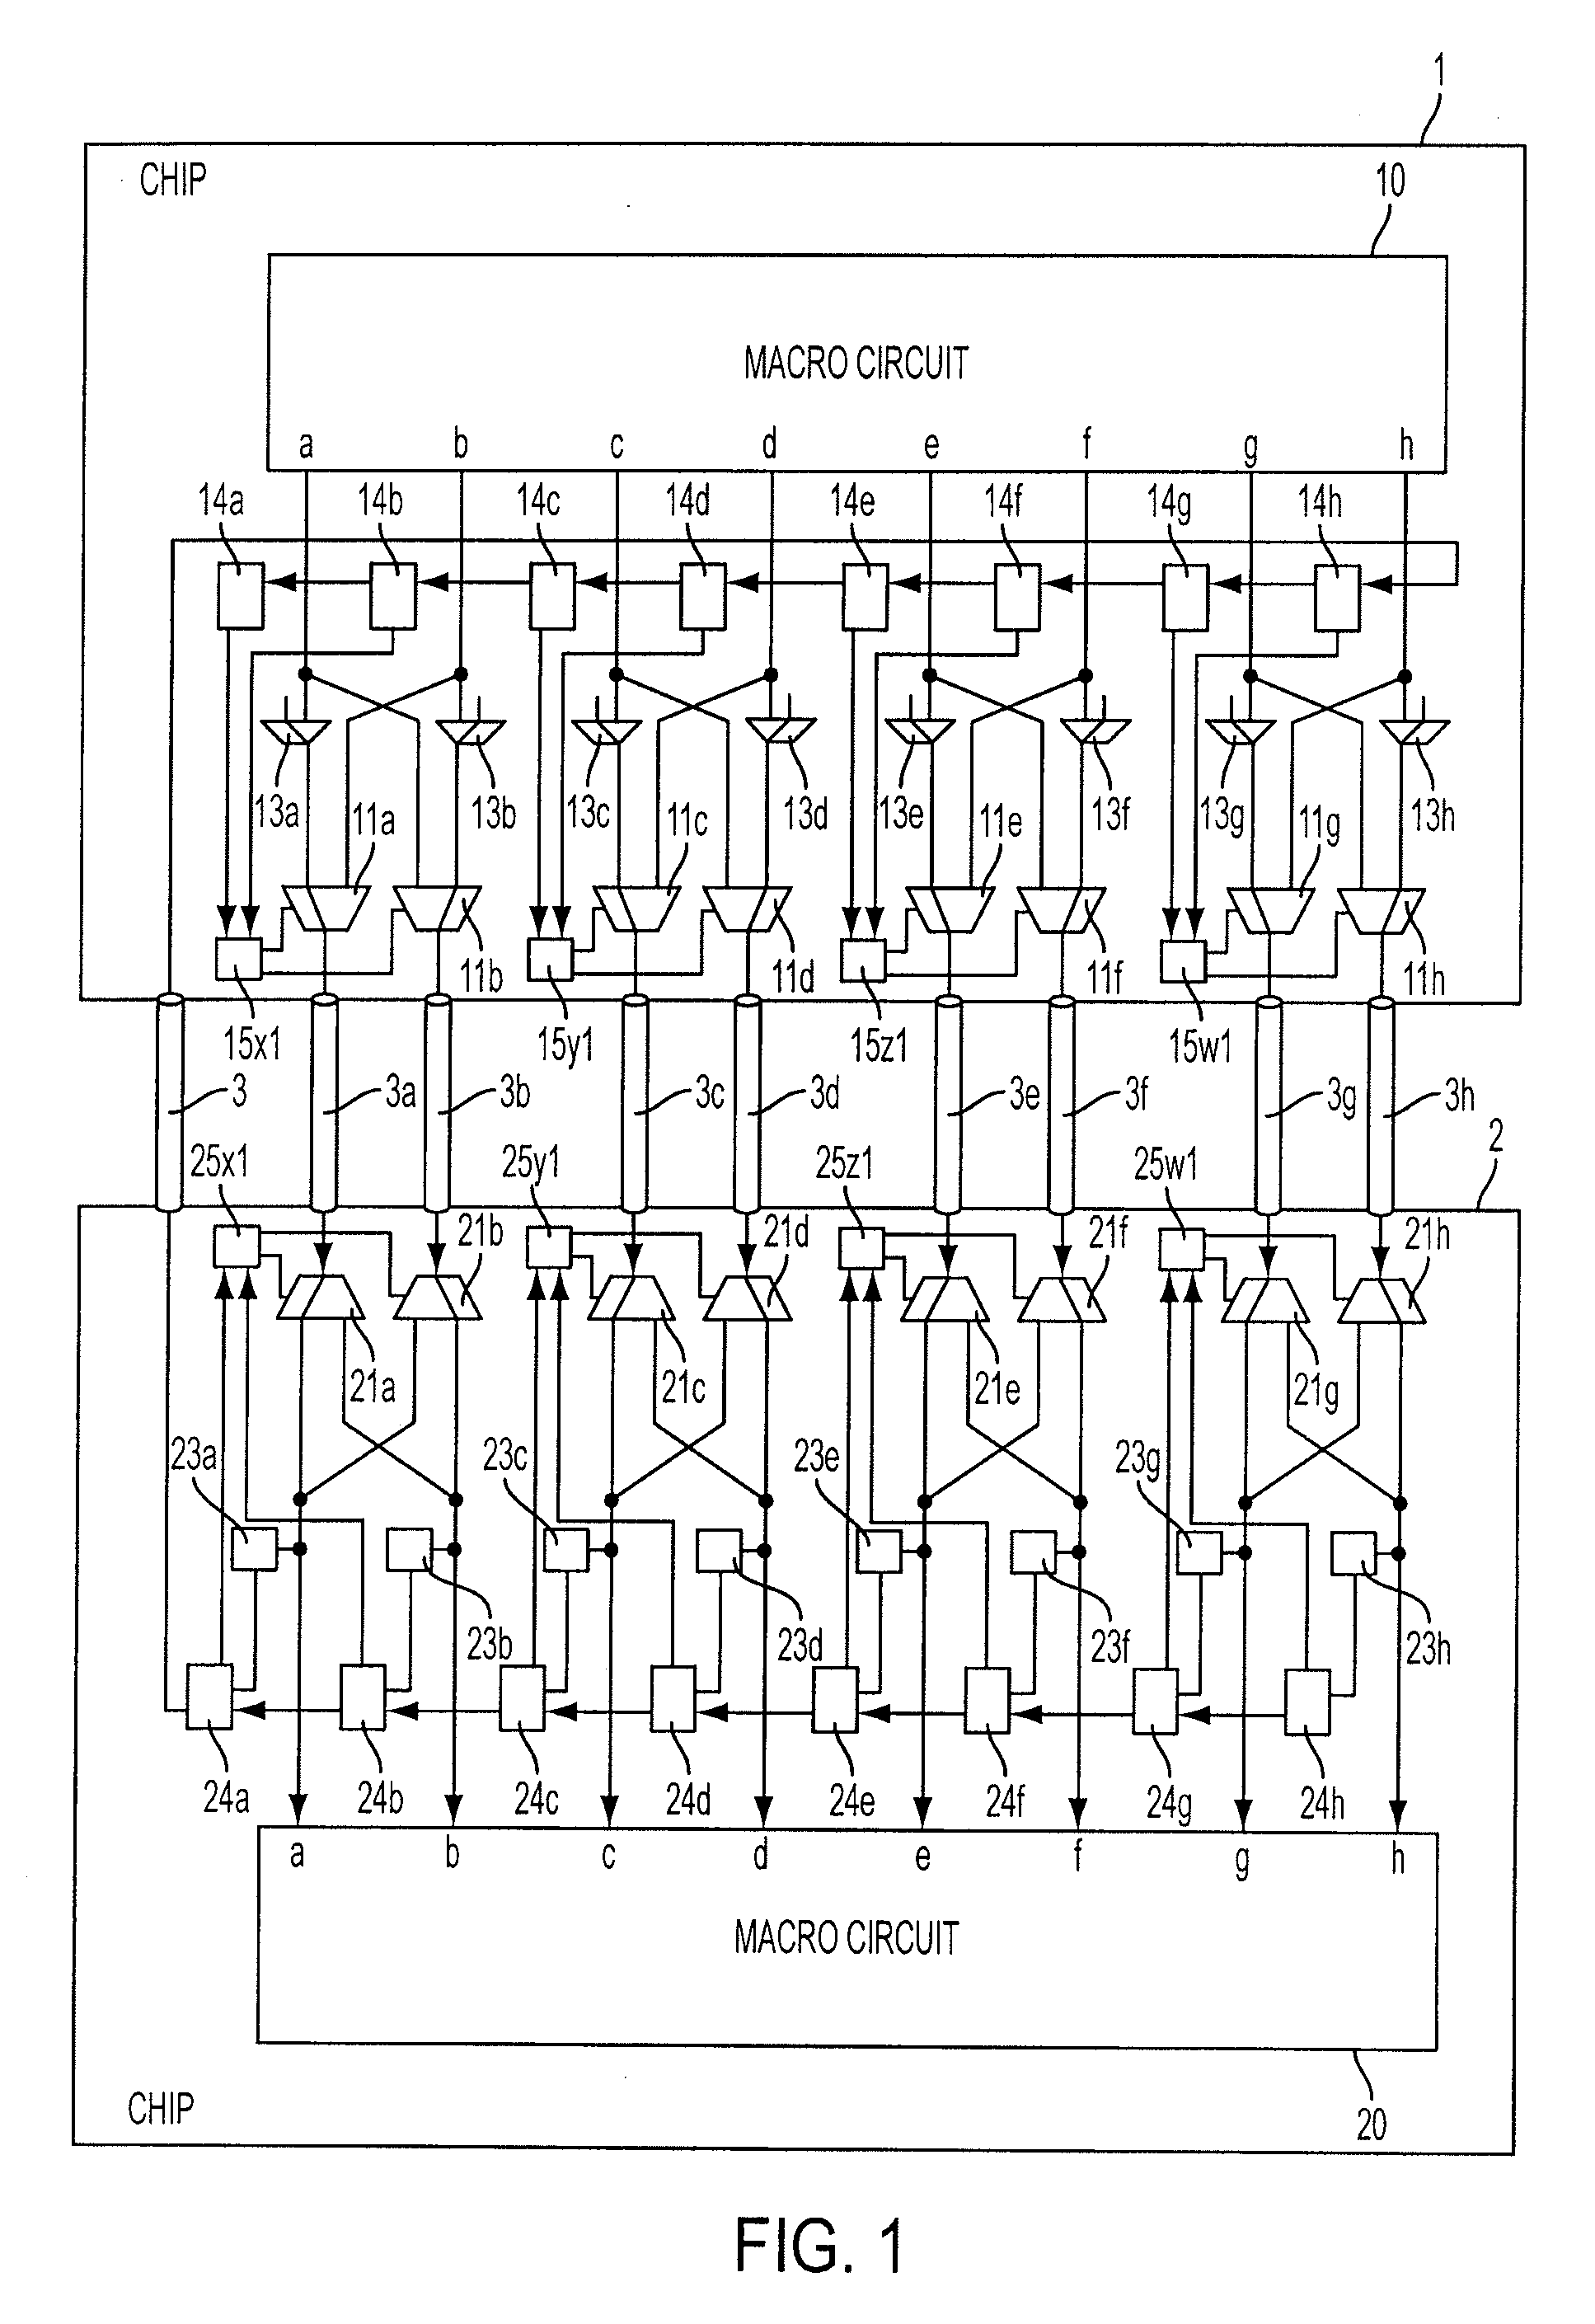 Data transfer between chips in a multi-chip semiconductor device with an increased data transfer speed